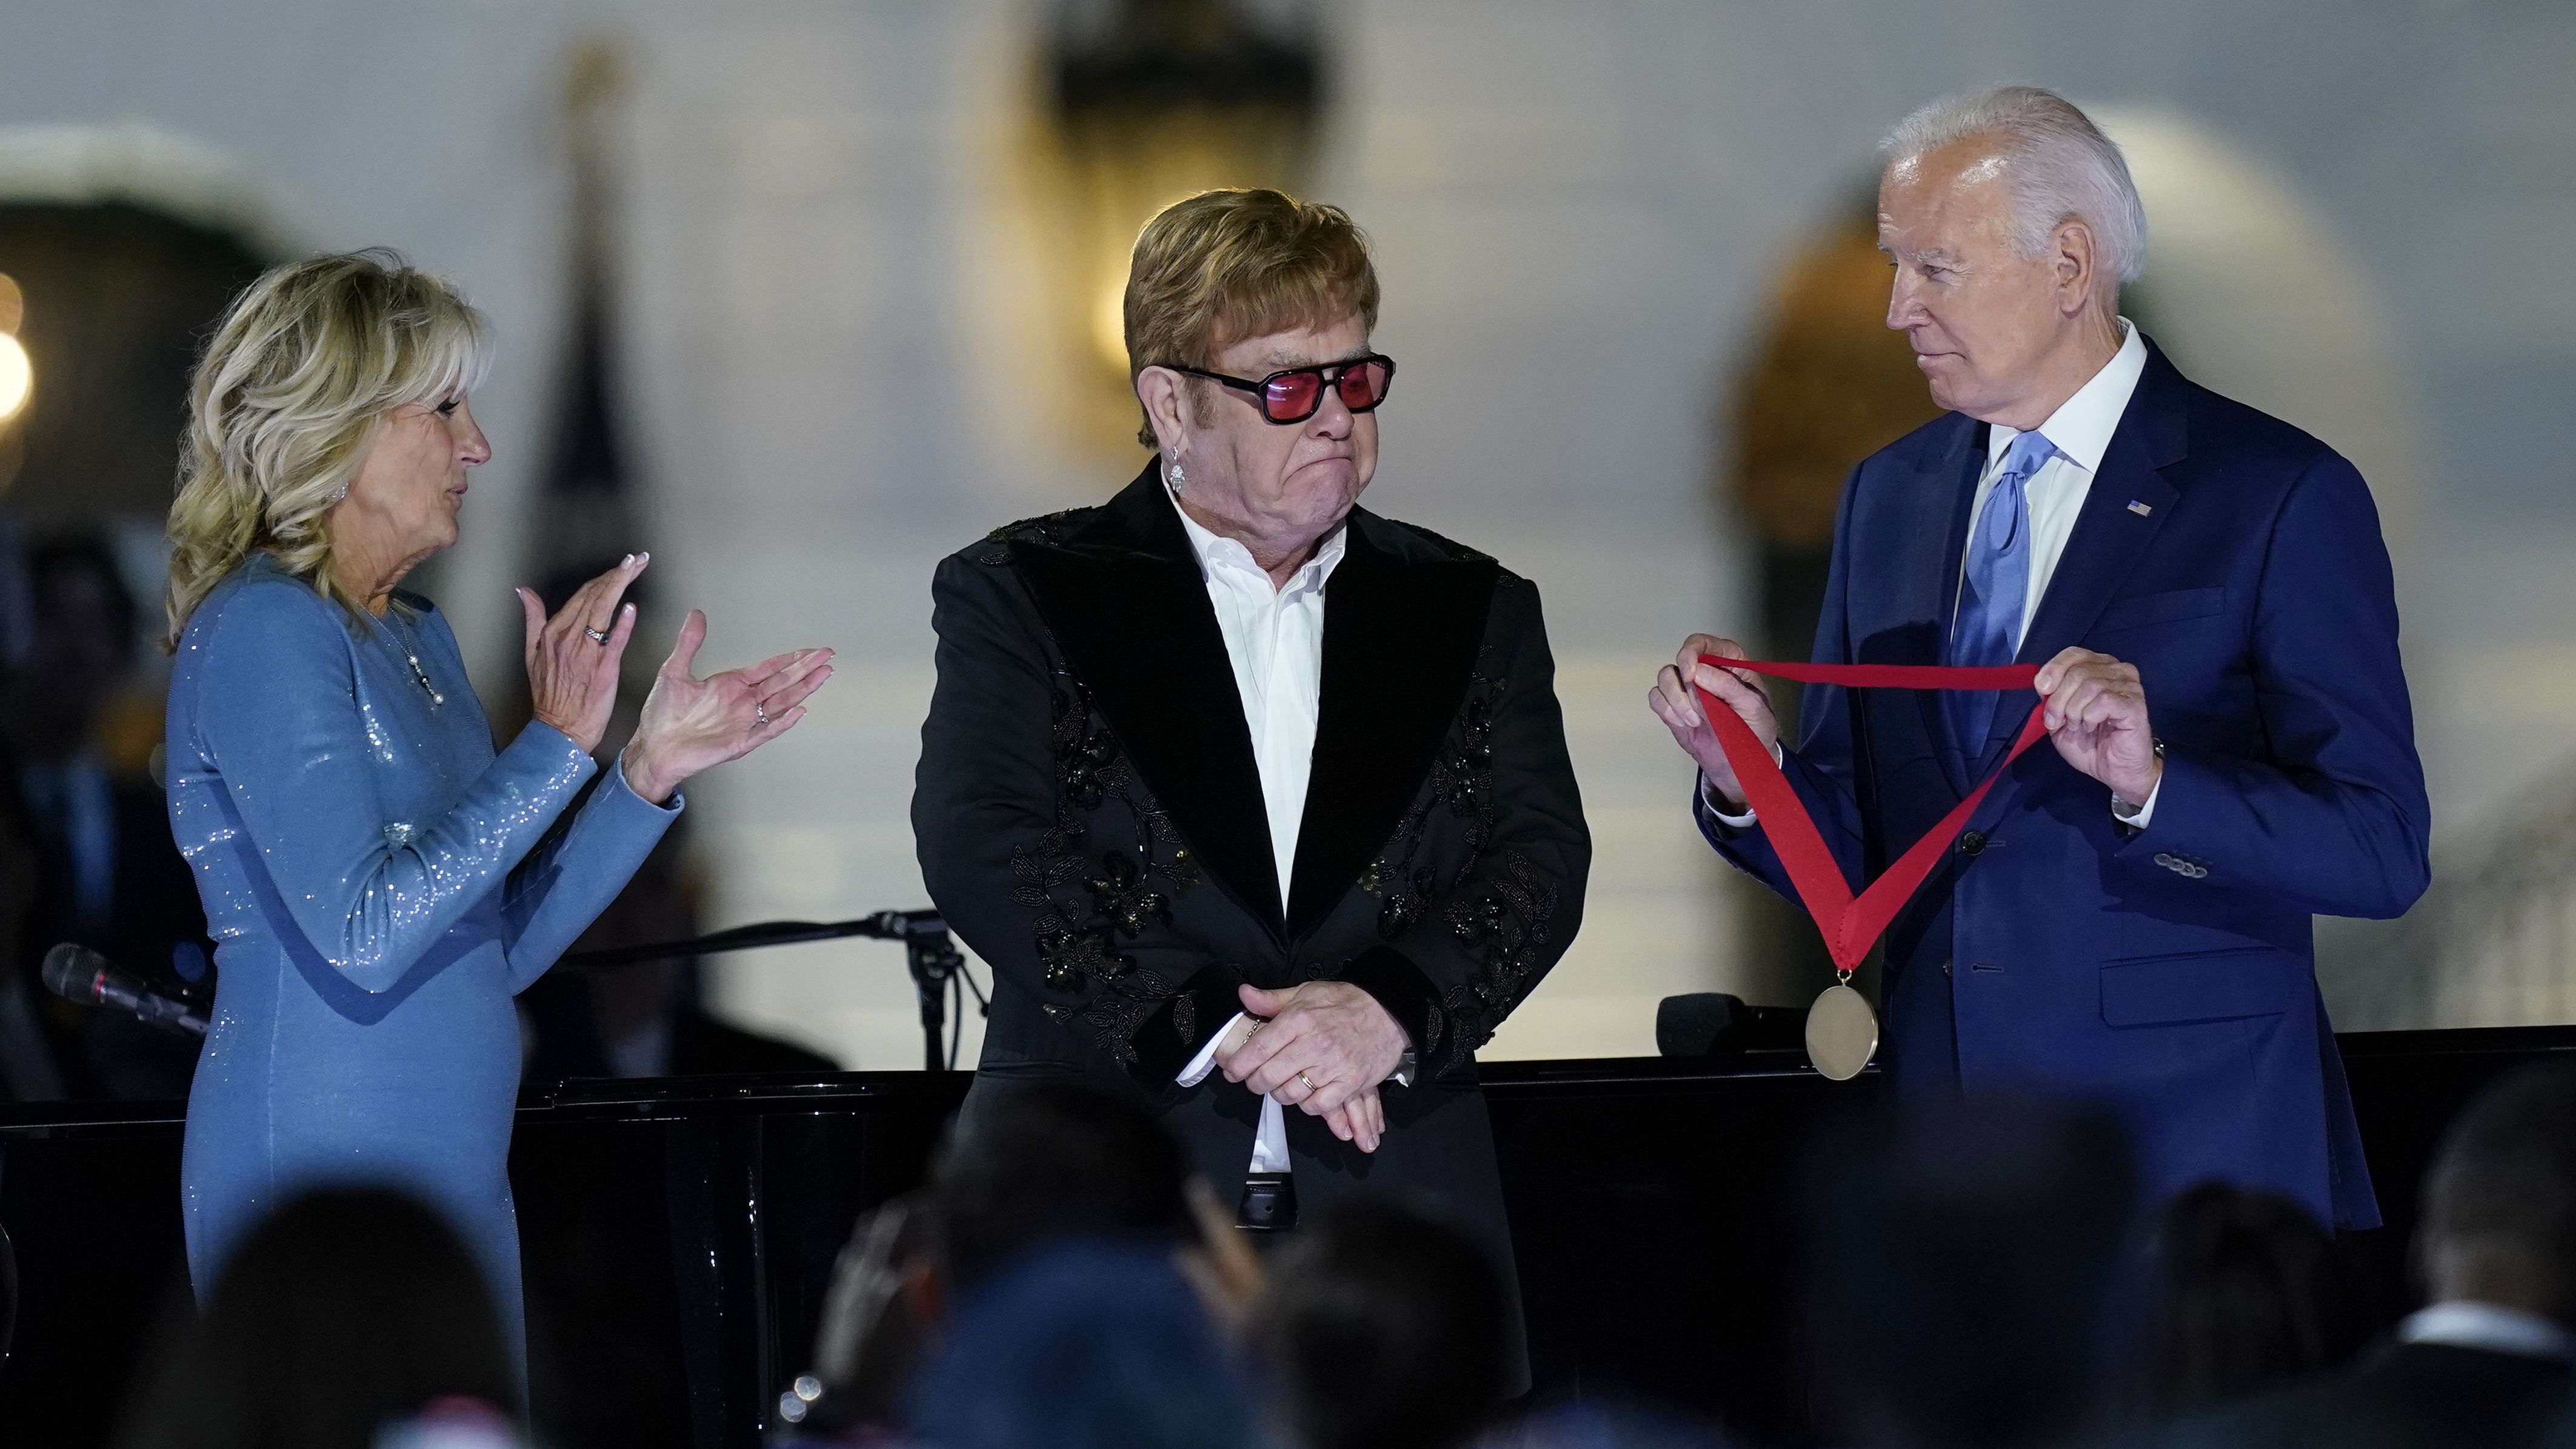 US President Joe Biden, joined by first lady Jill Biden, <a href="https://www.cnn.com/2022/09/23/politics/elton-john-humanities-medal-white-house-performance-biden/index.html" target="_blank">presents John with the National Humanities Medal</a> after a concert on the South Lawn of the White House in September 2022. The medal, according to the presentation, was to honor John "for moving our souls with his powerful voice and one of the defining song books of all time. An enduring icon and advocate with absolute courage, who found purpose to challenge convention, shatter stigma and advance the simple truth — that everyone deserves to be treated with dignity and respect."